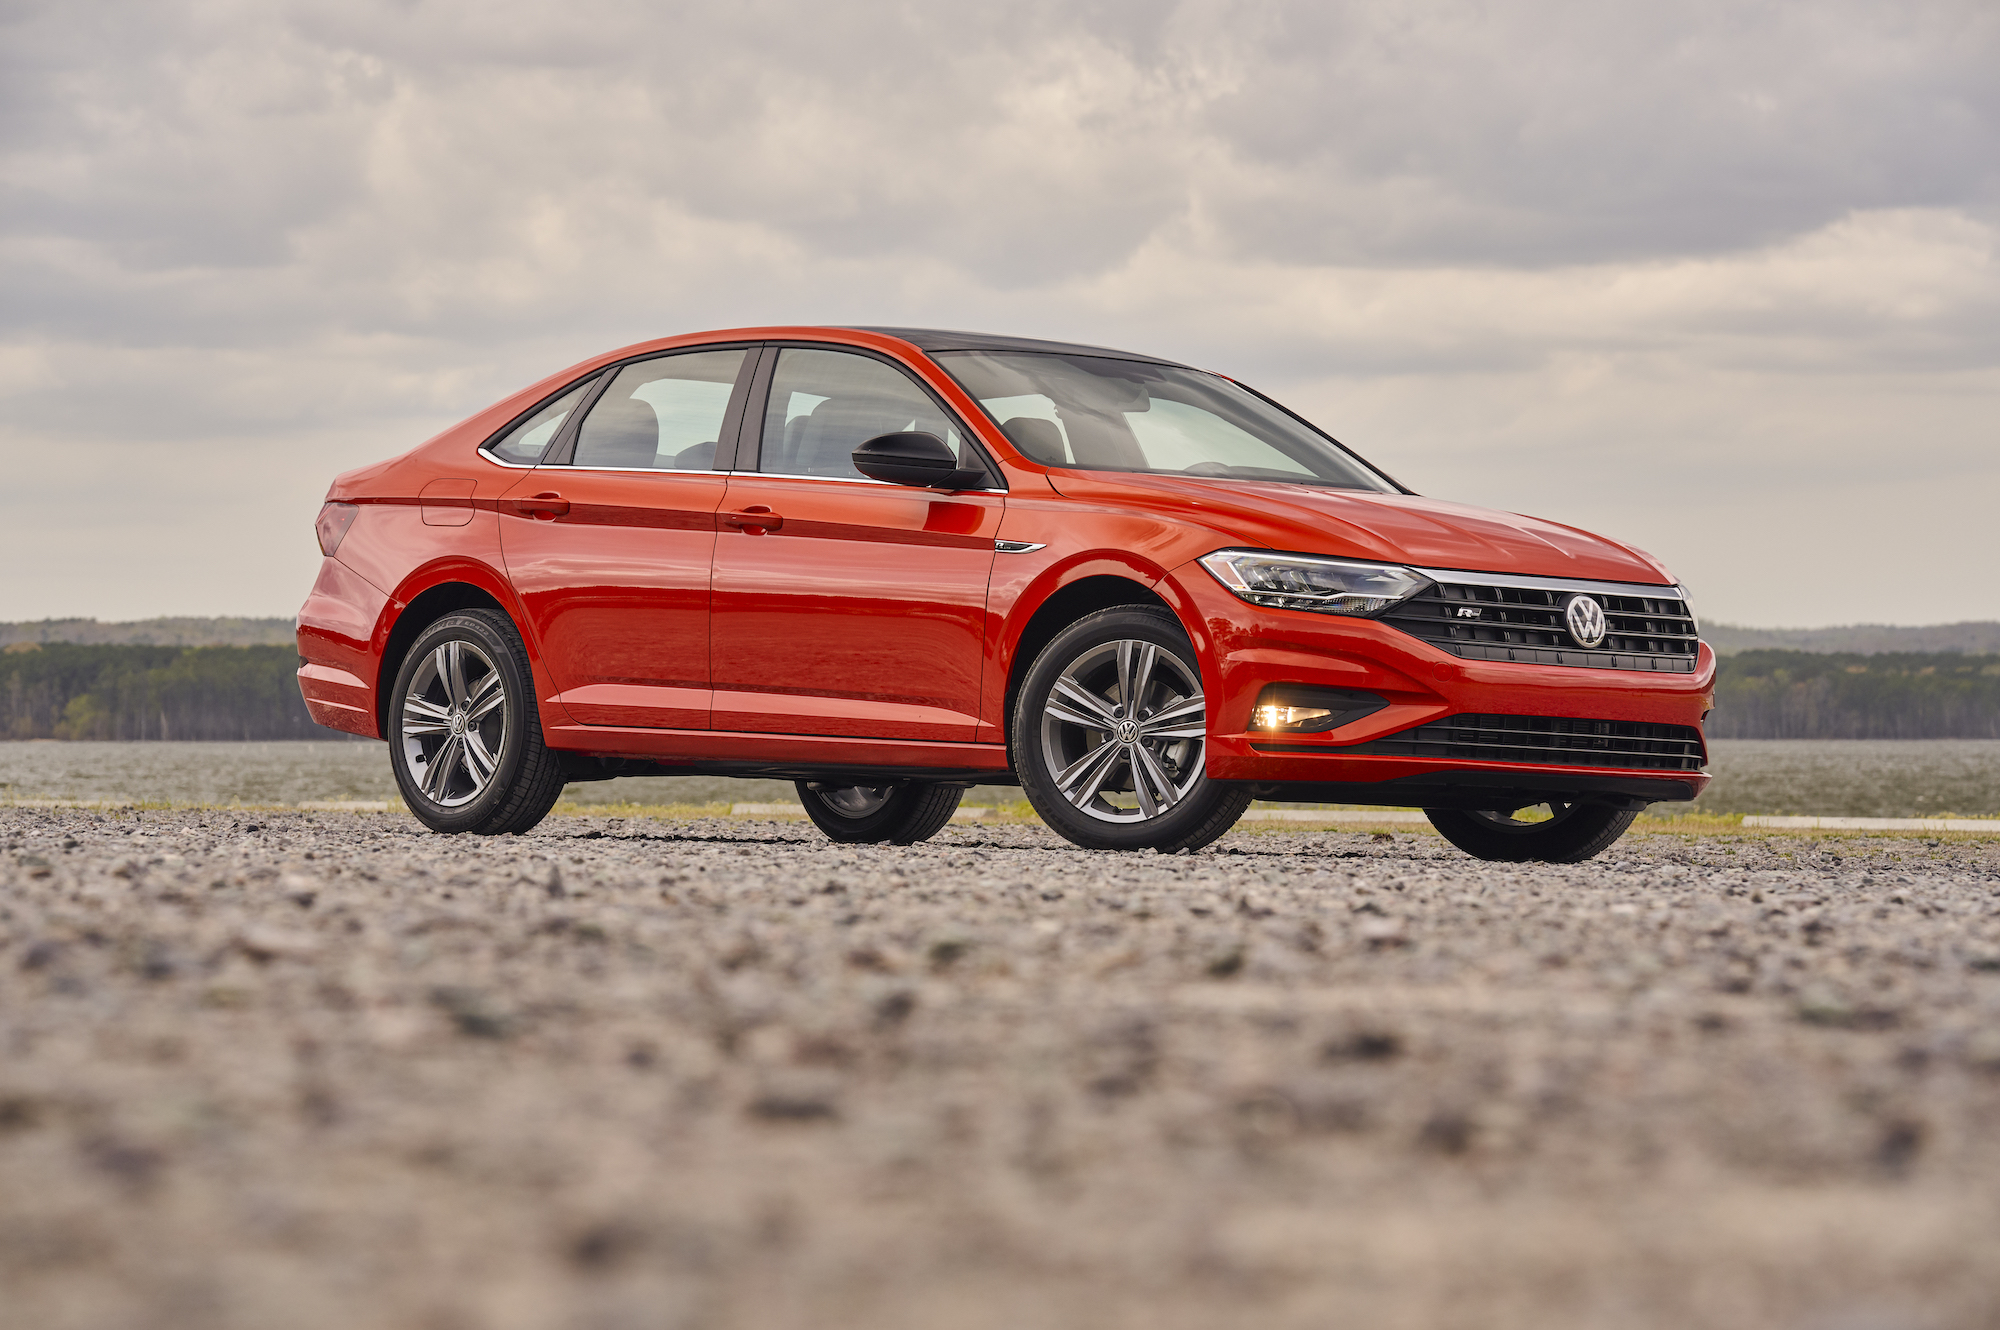 A red 2019 Volkswagen Jetta compact sedan parked on gravel on a cloudy day with mountains in the distance